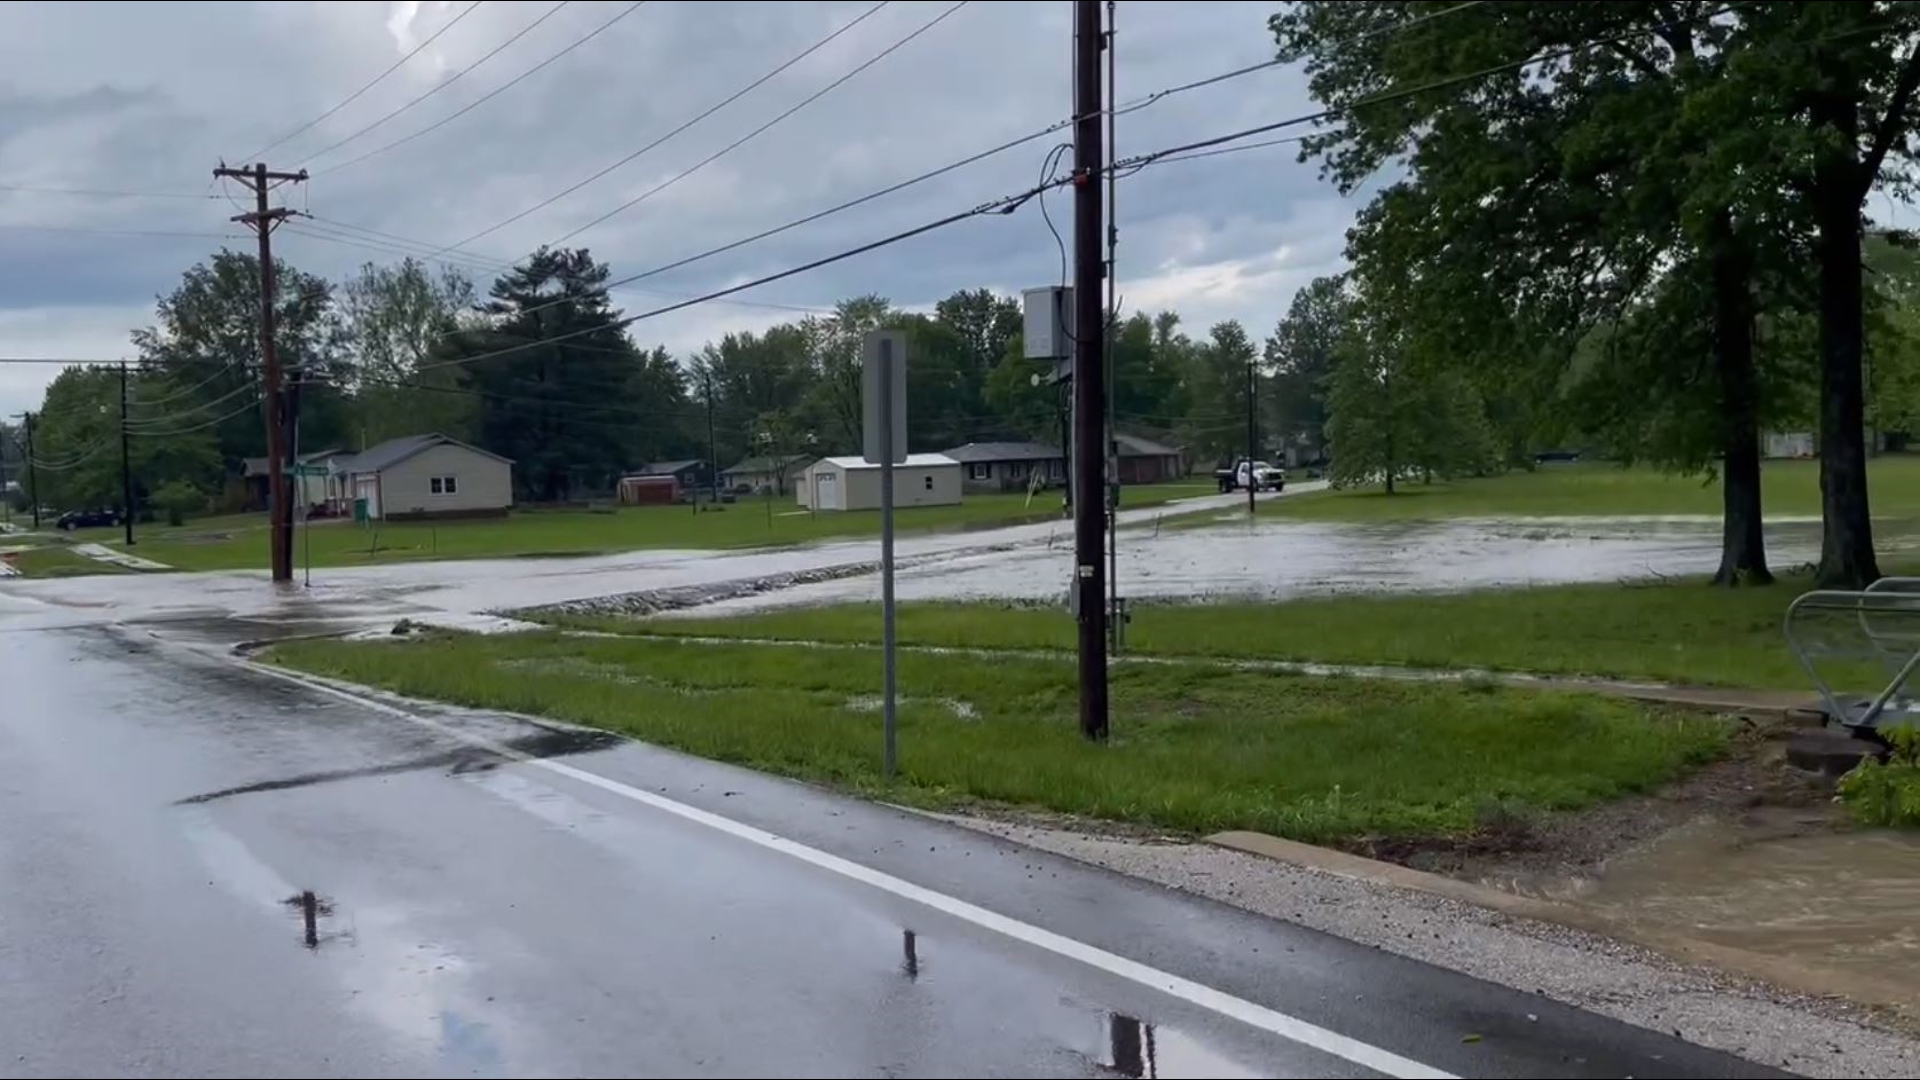 J.T. Hardy provided this video of flooding at Highway 185 at North & South